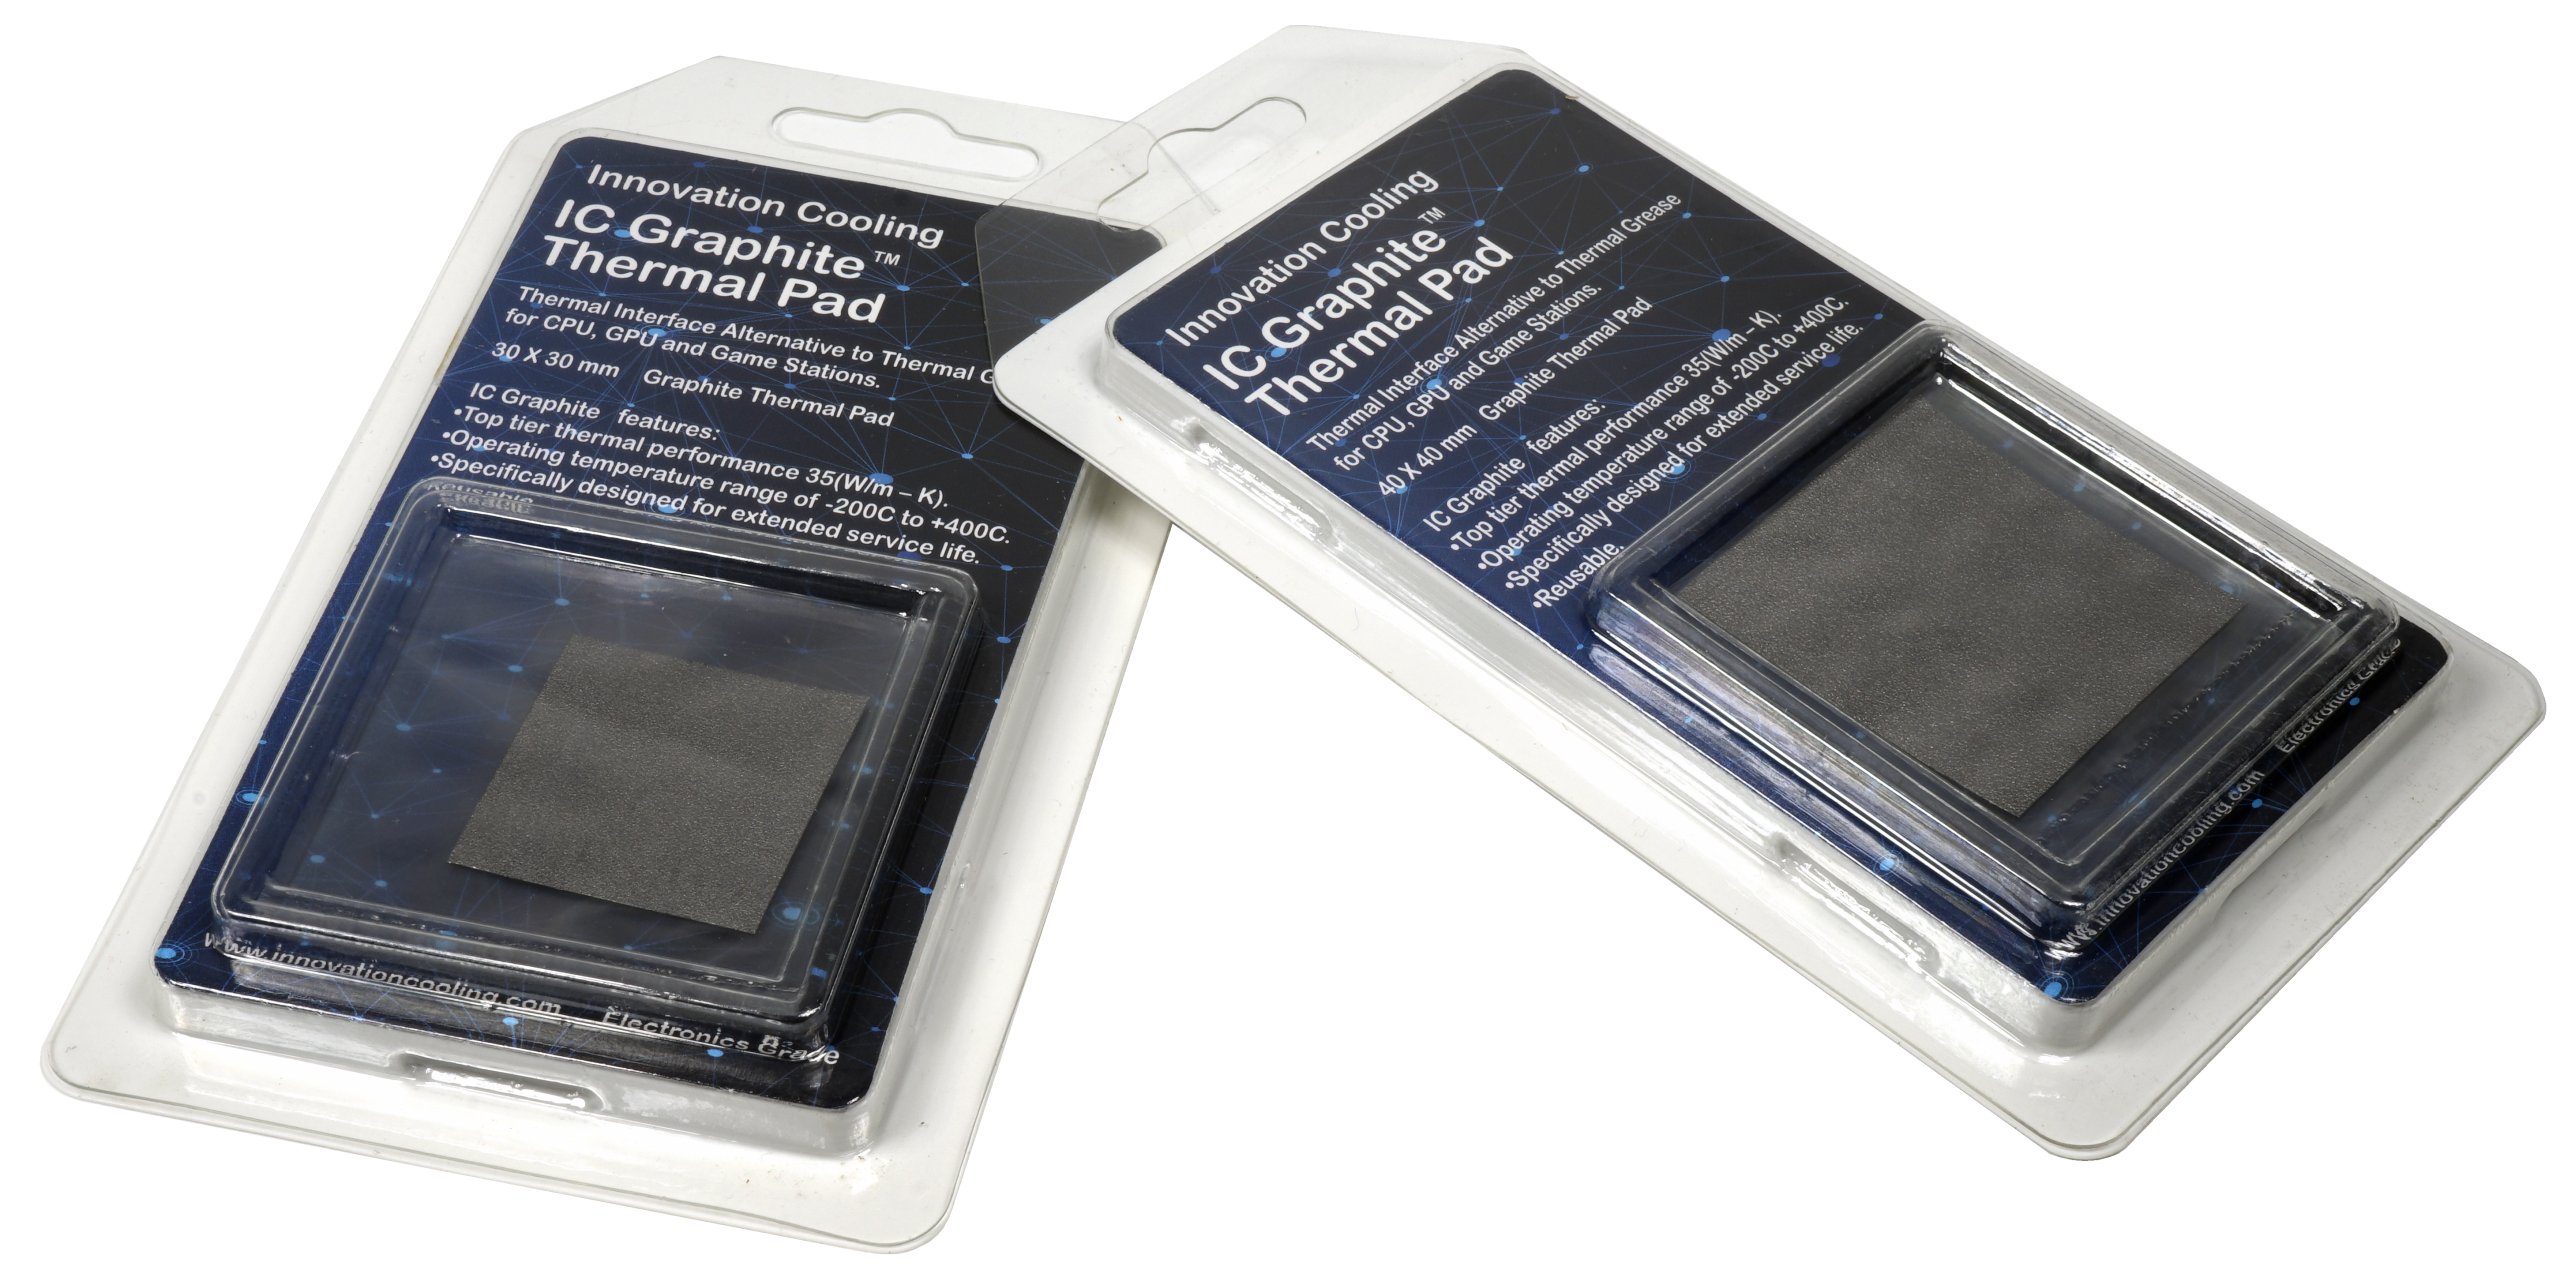 Innovation Cooling IC Graphite Thermal Pad in Test - Convenience 